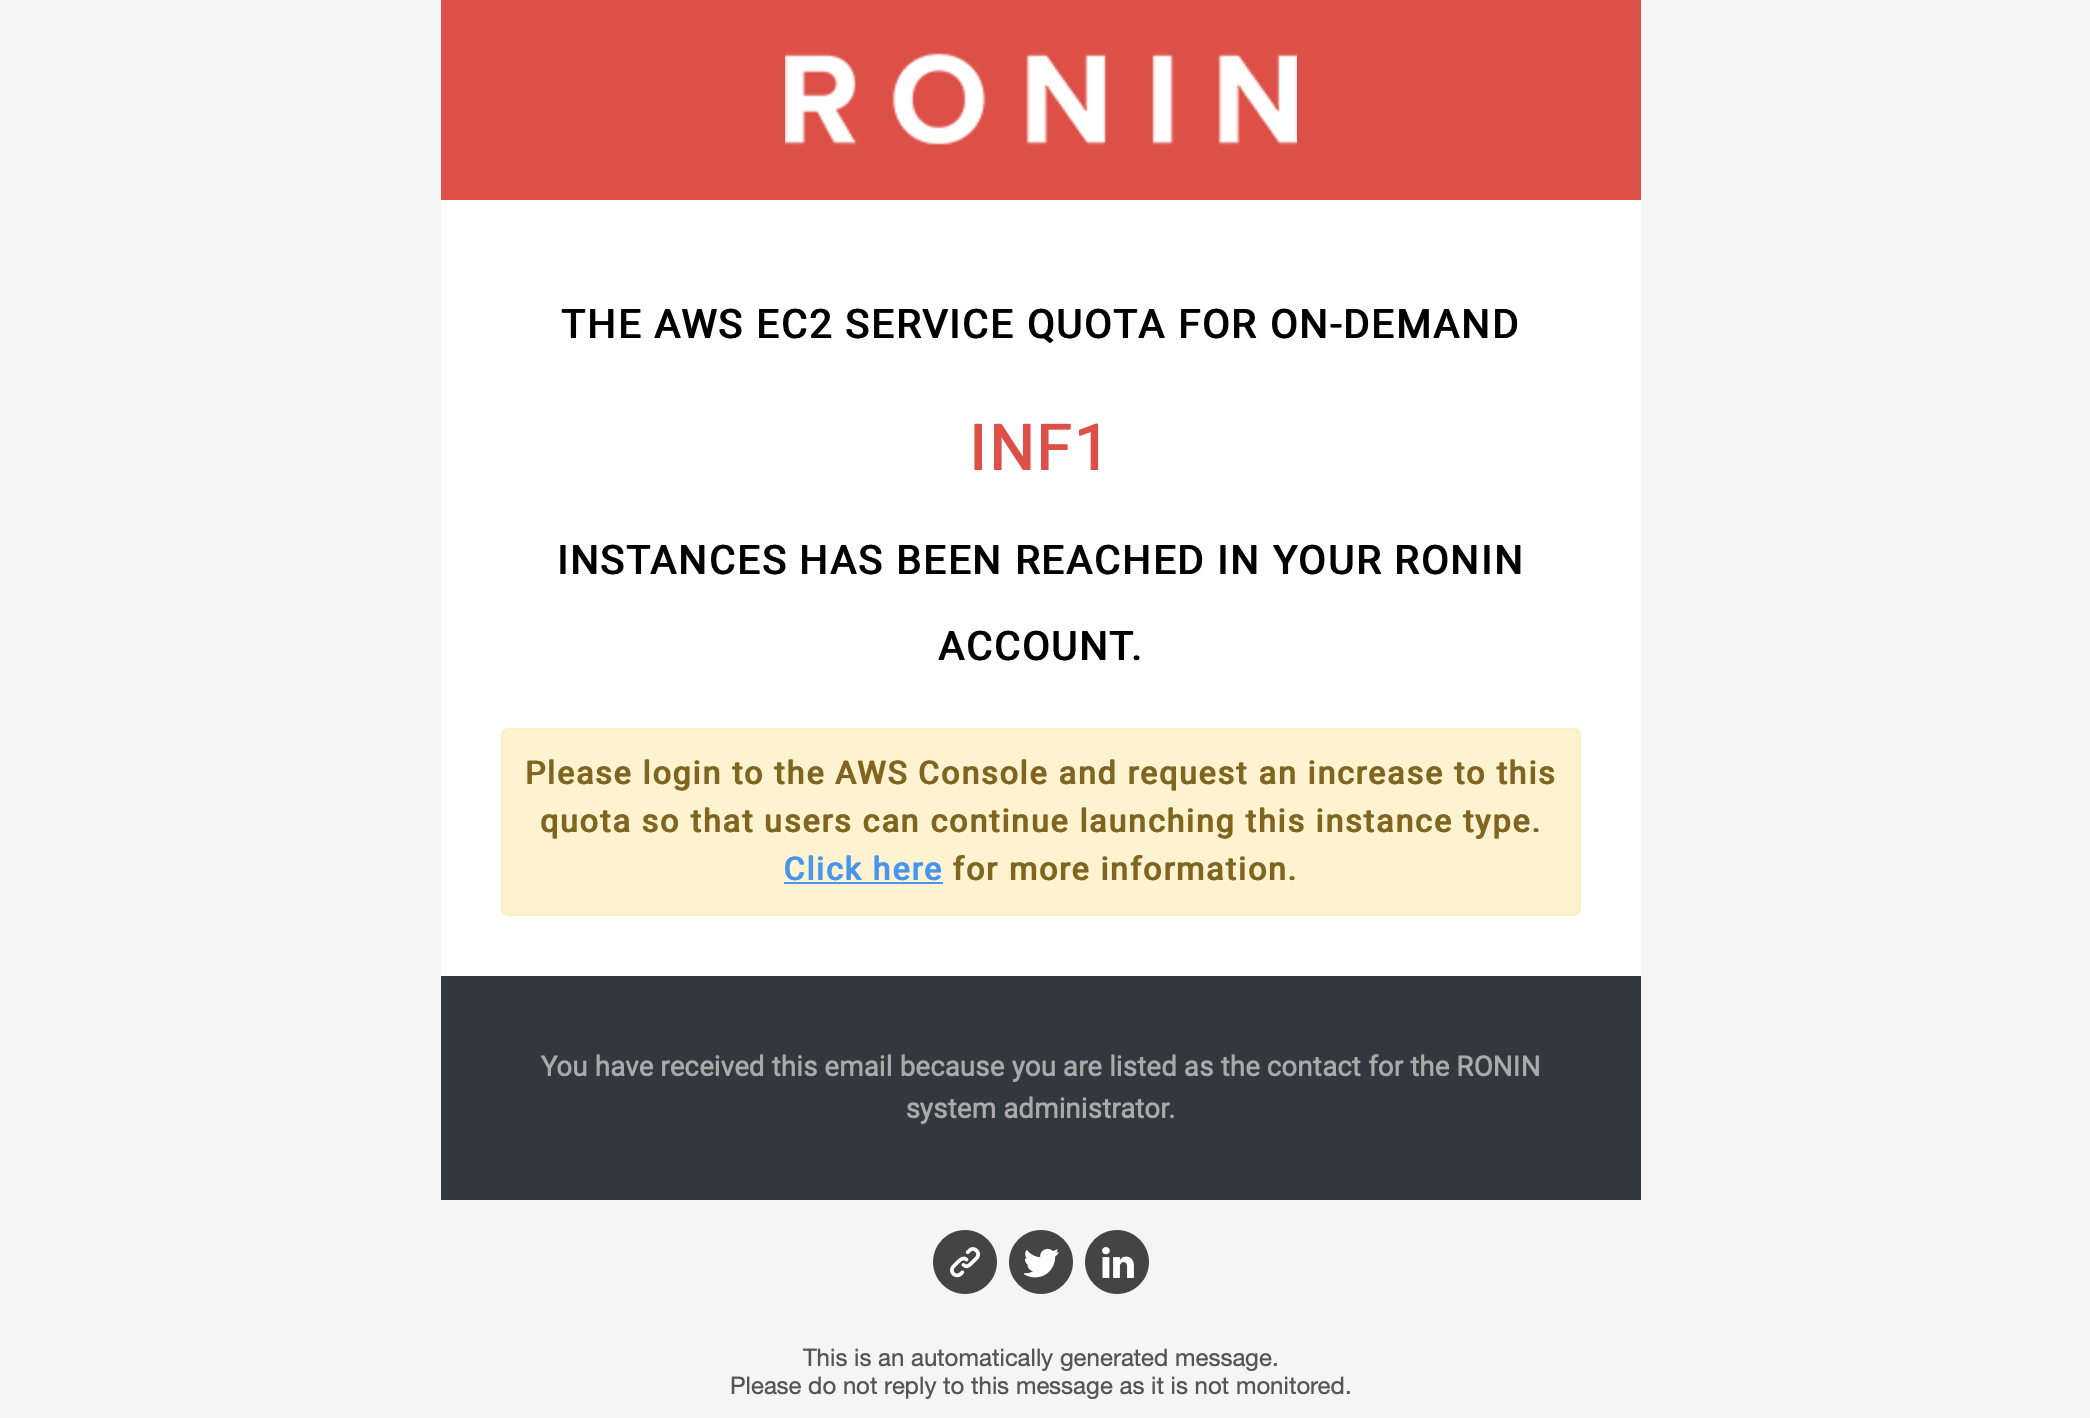 RONIN Release: Thursday 11th May 2023